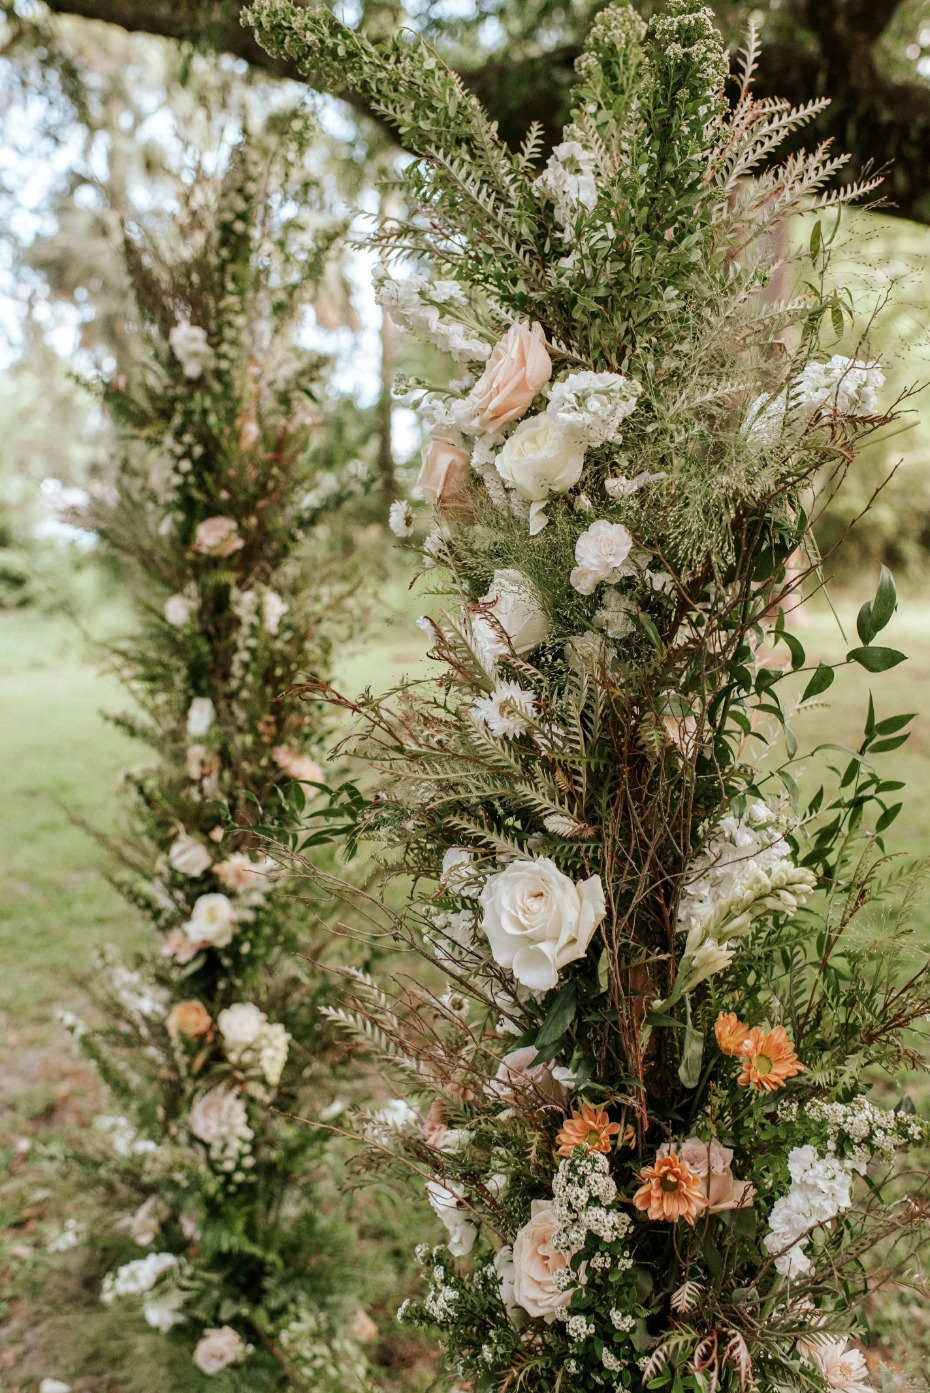 This Charming Garden Wedding Look Like It Jumped Off The Pages Of Your Favorite Jane Austin Novel